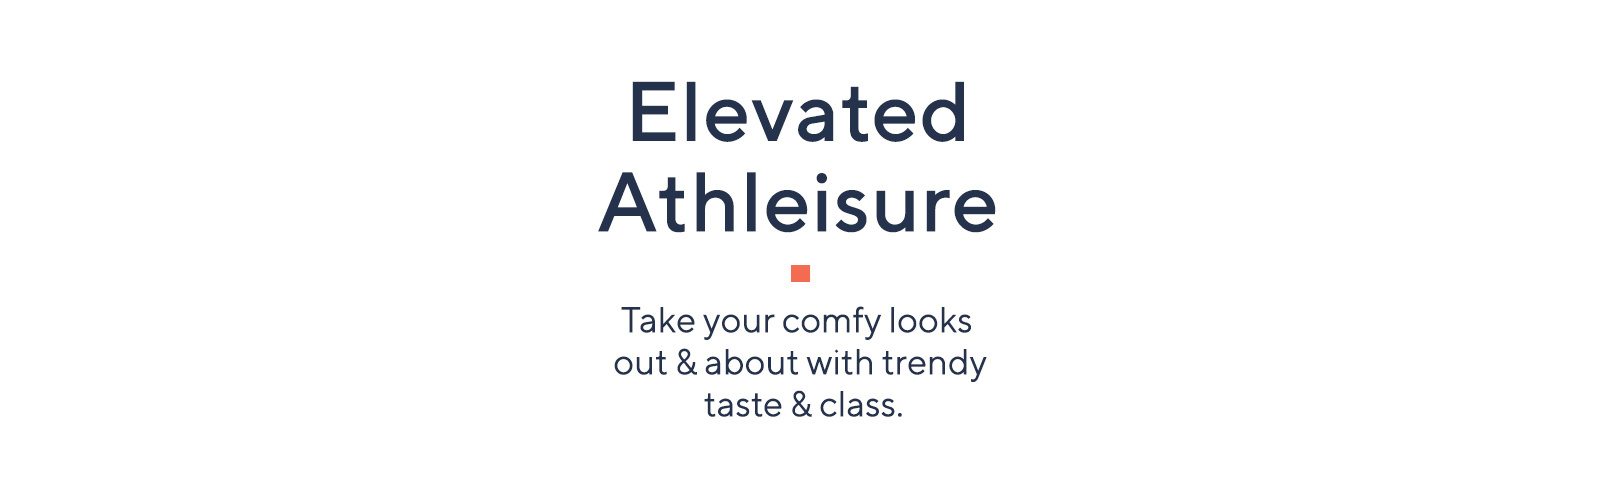 Elevated Athleisure  Take your comfy looks out & about with trendy taste & class.